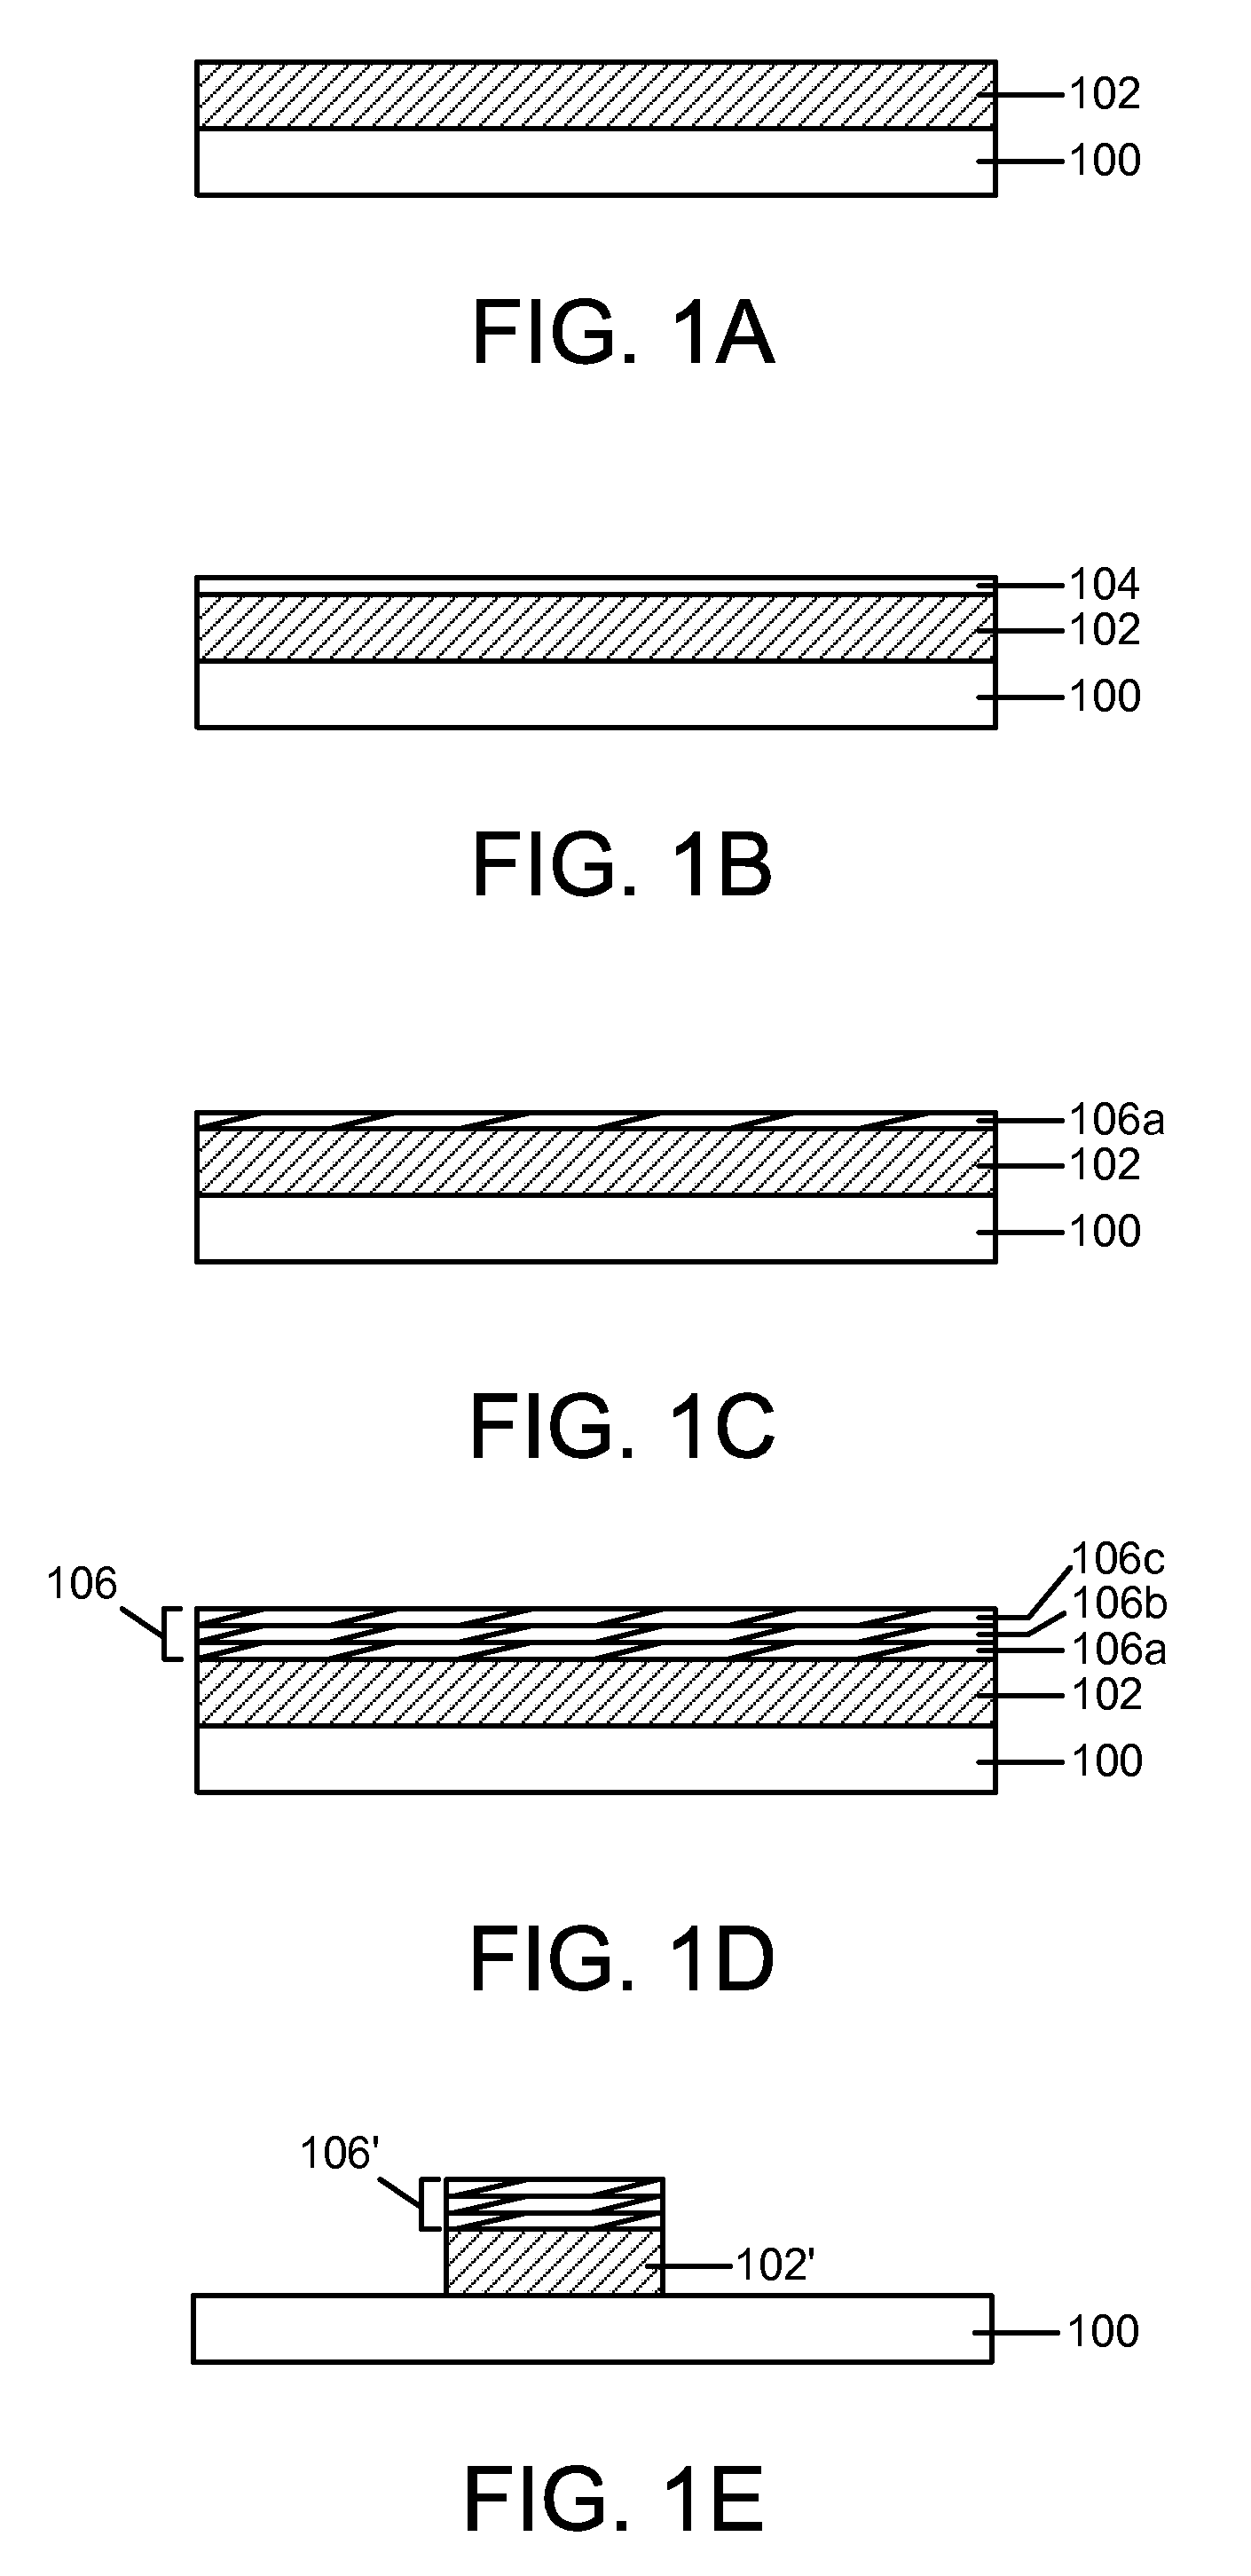 Sequential flow deposition of a tungsten silicide gate electrode film